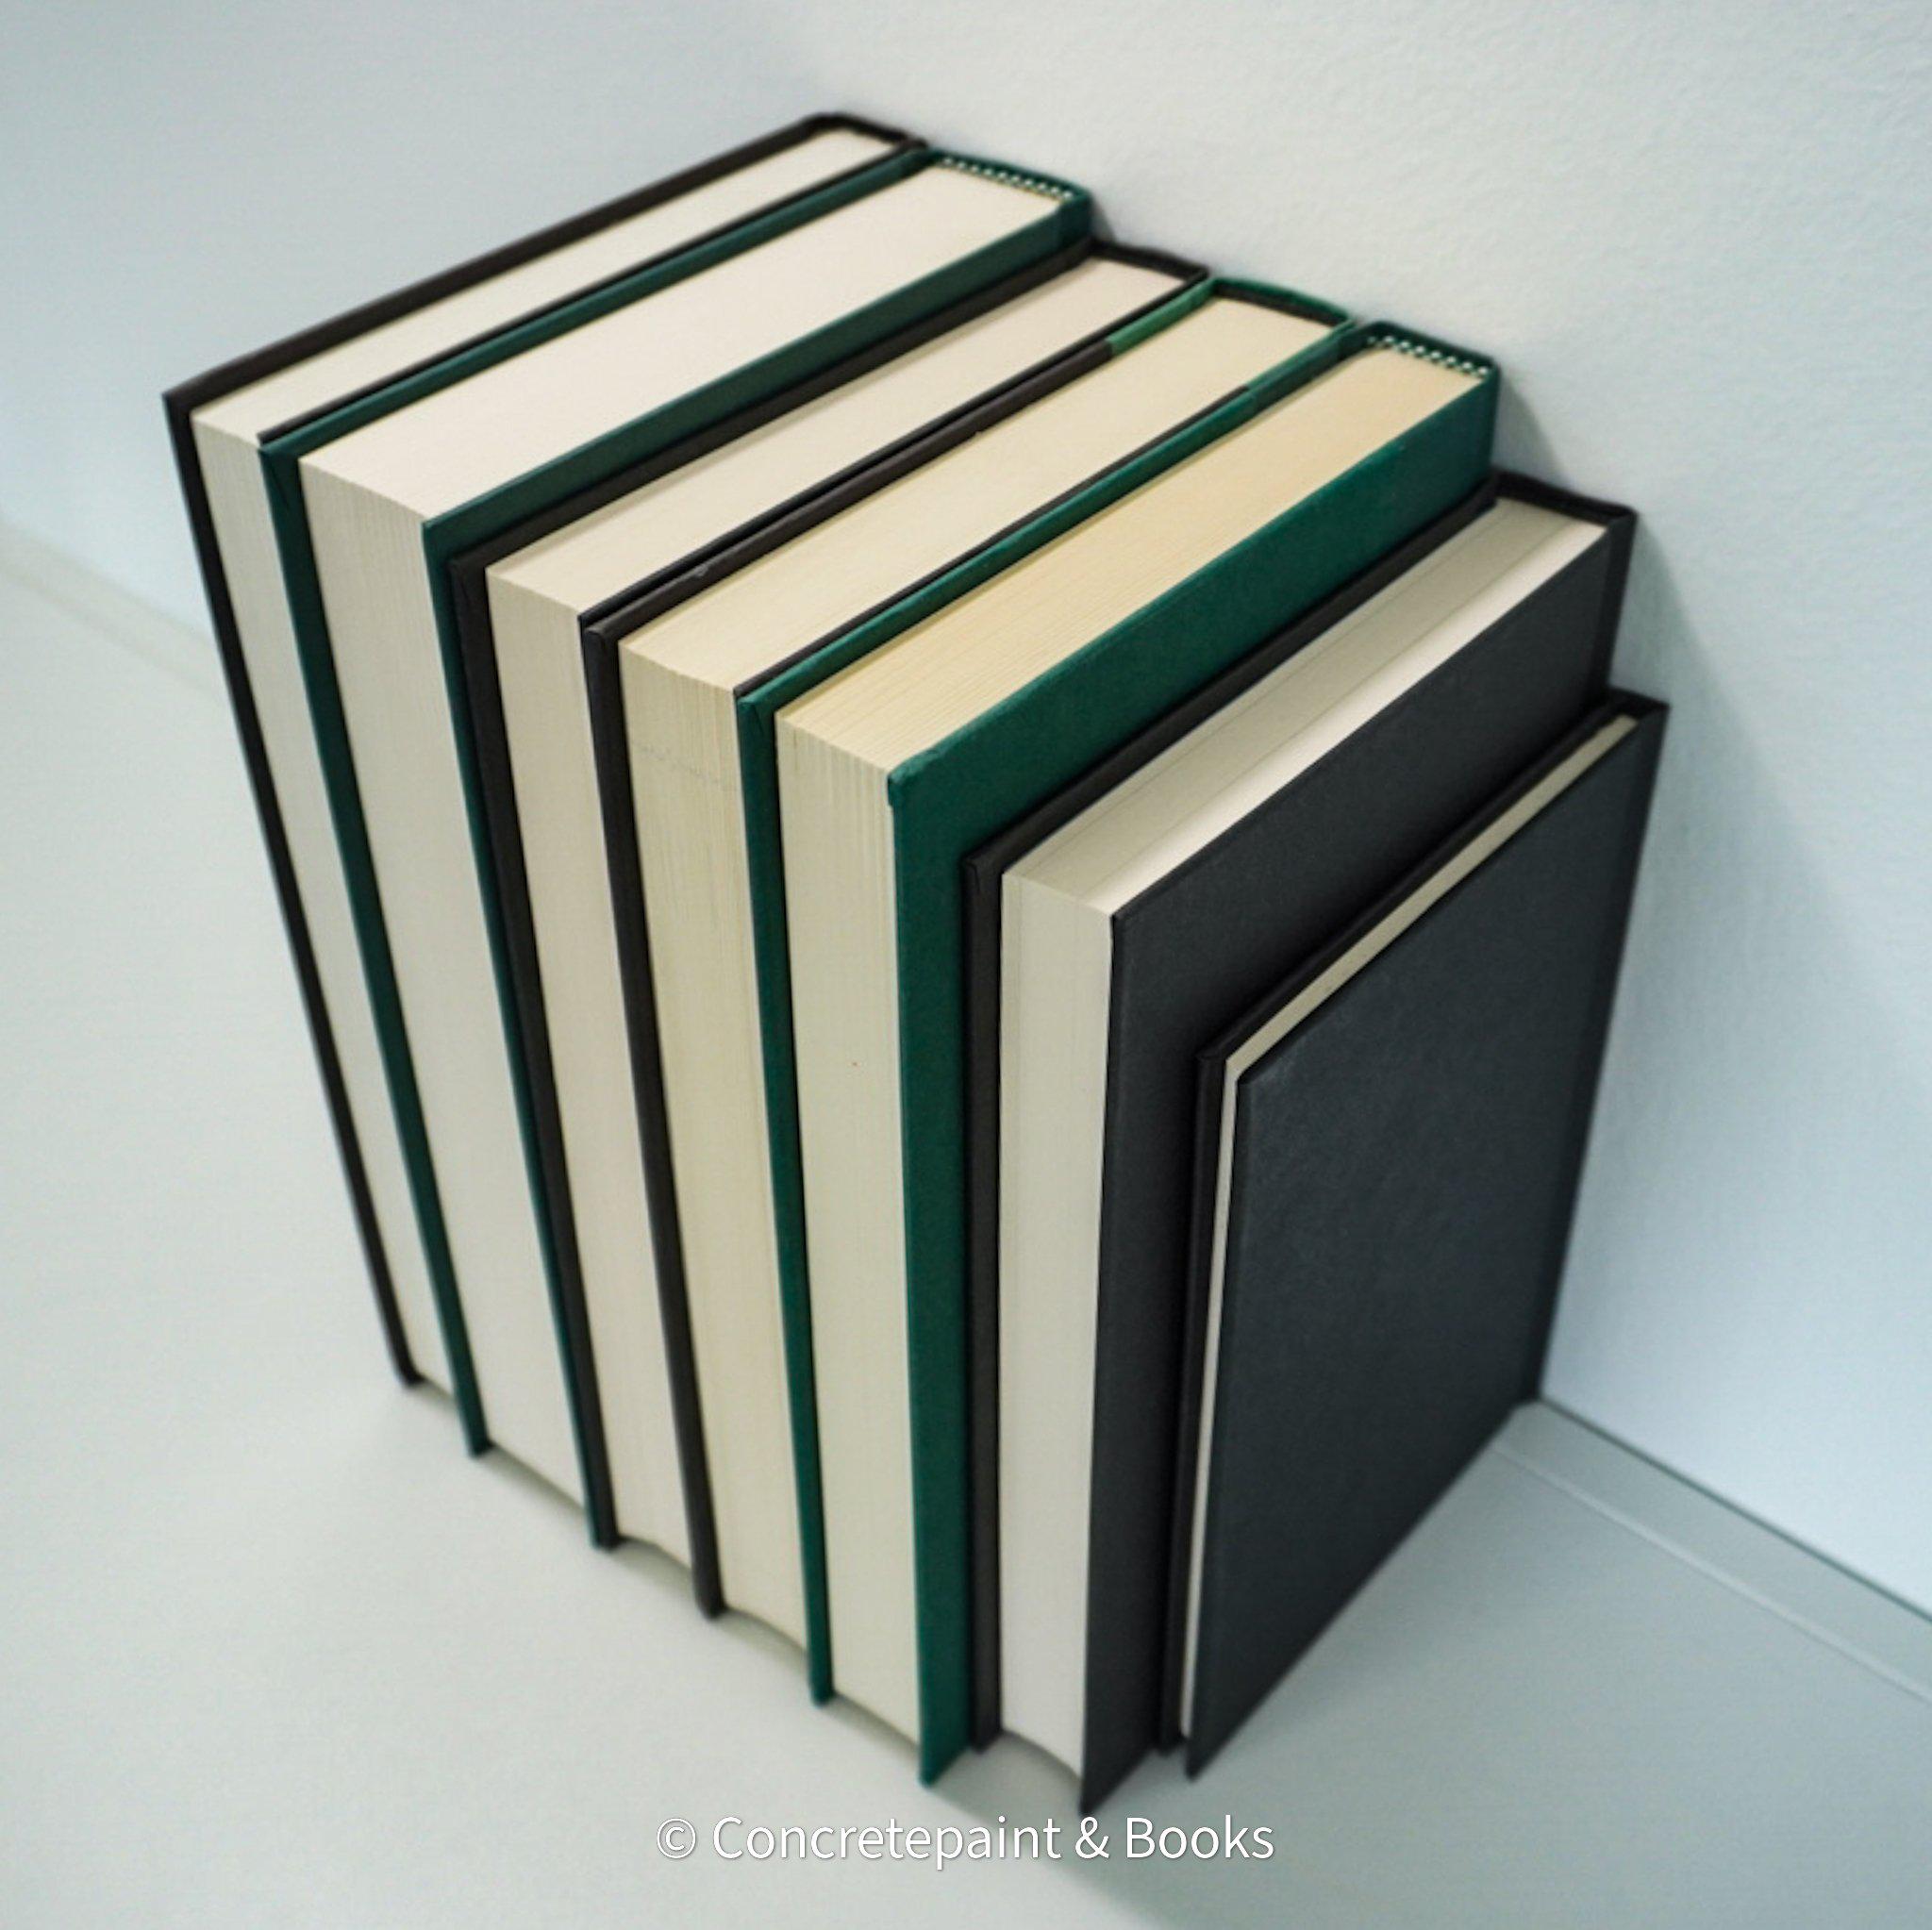 Black and green hardcover real books staged and used as home décor. Book stack on a shelf.